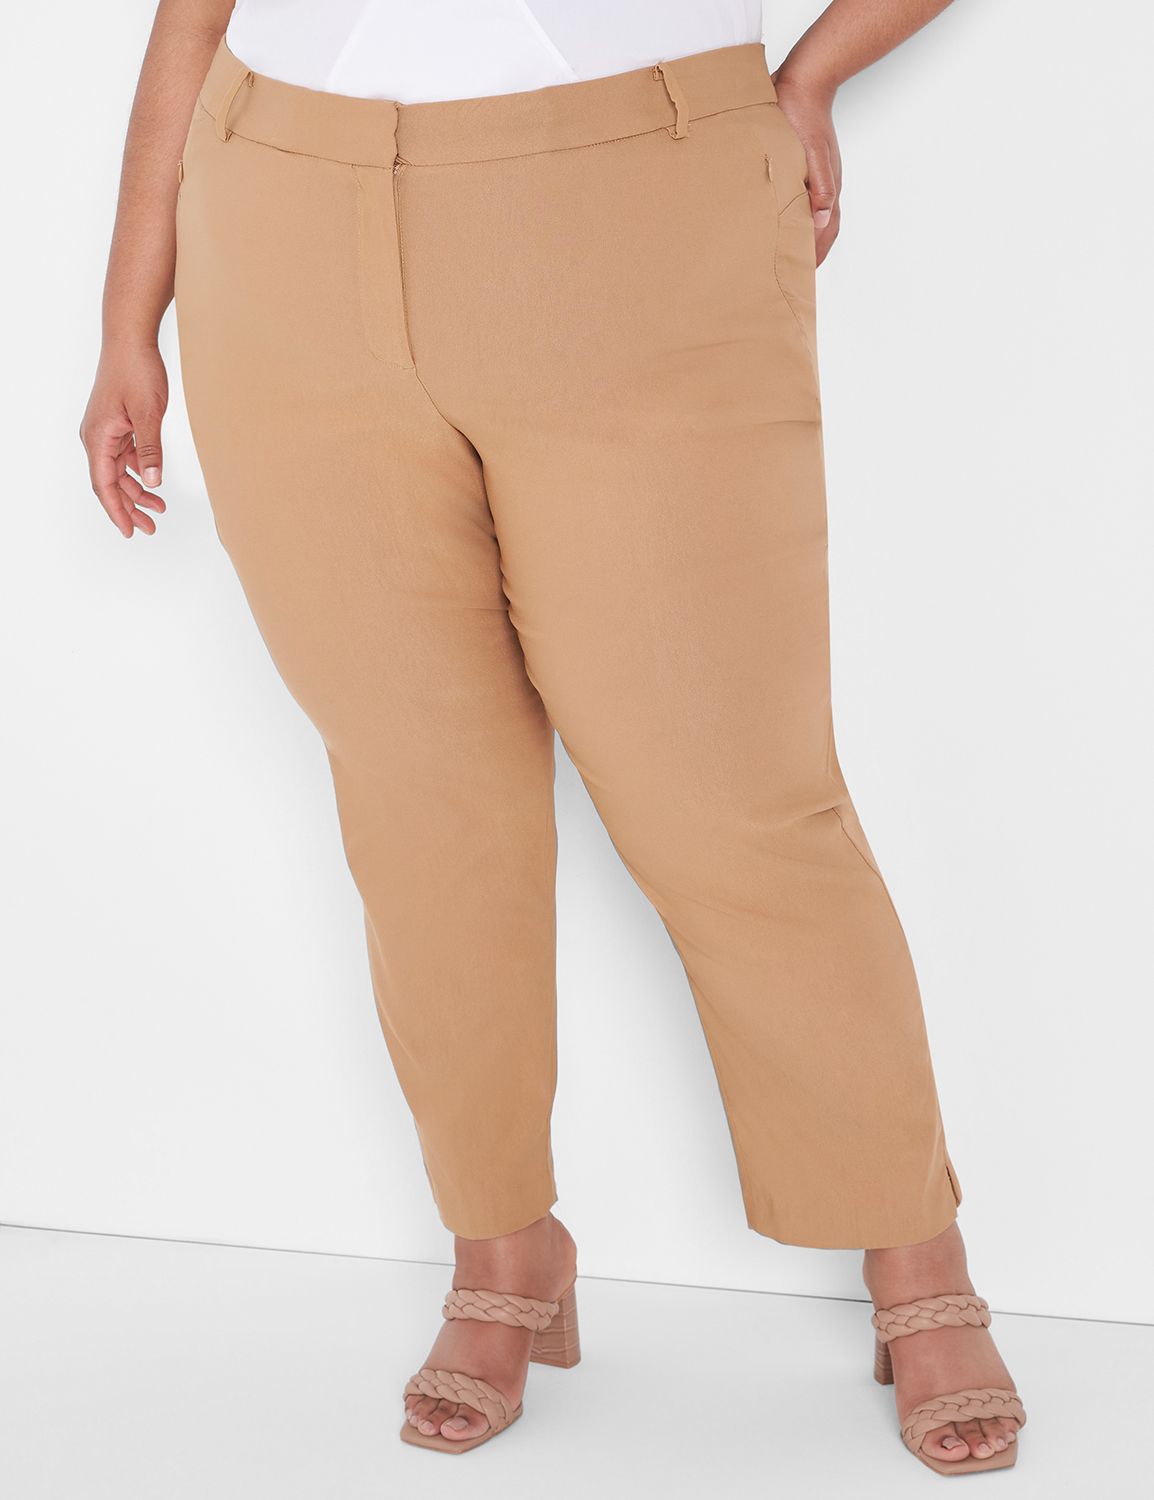 6 plus-size work pants that'll have you ready for the office in a